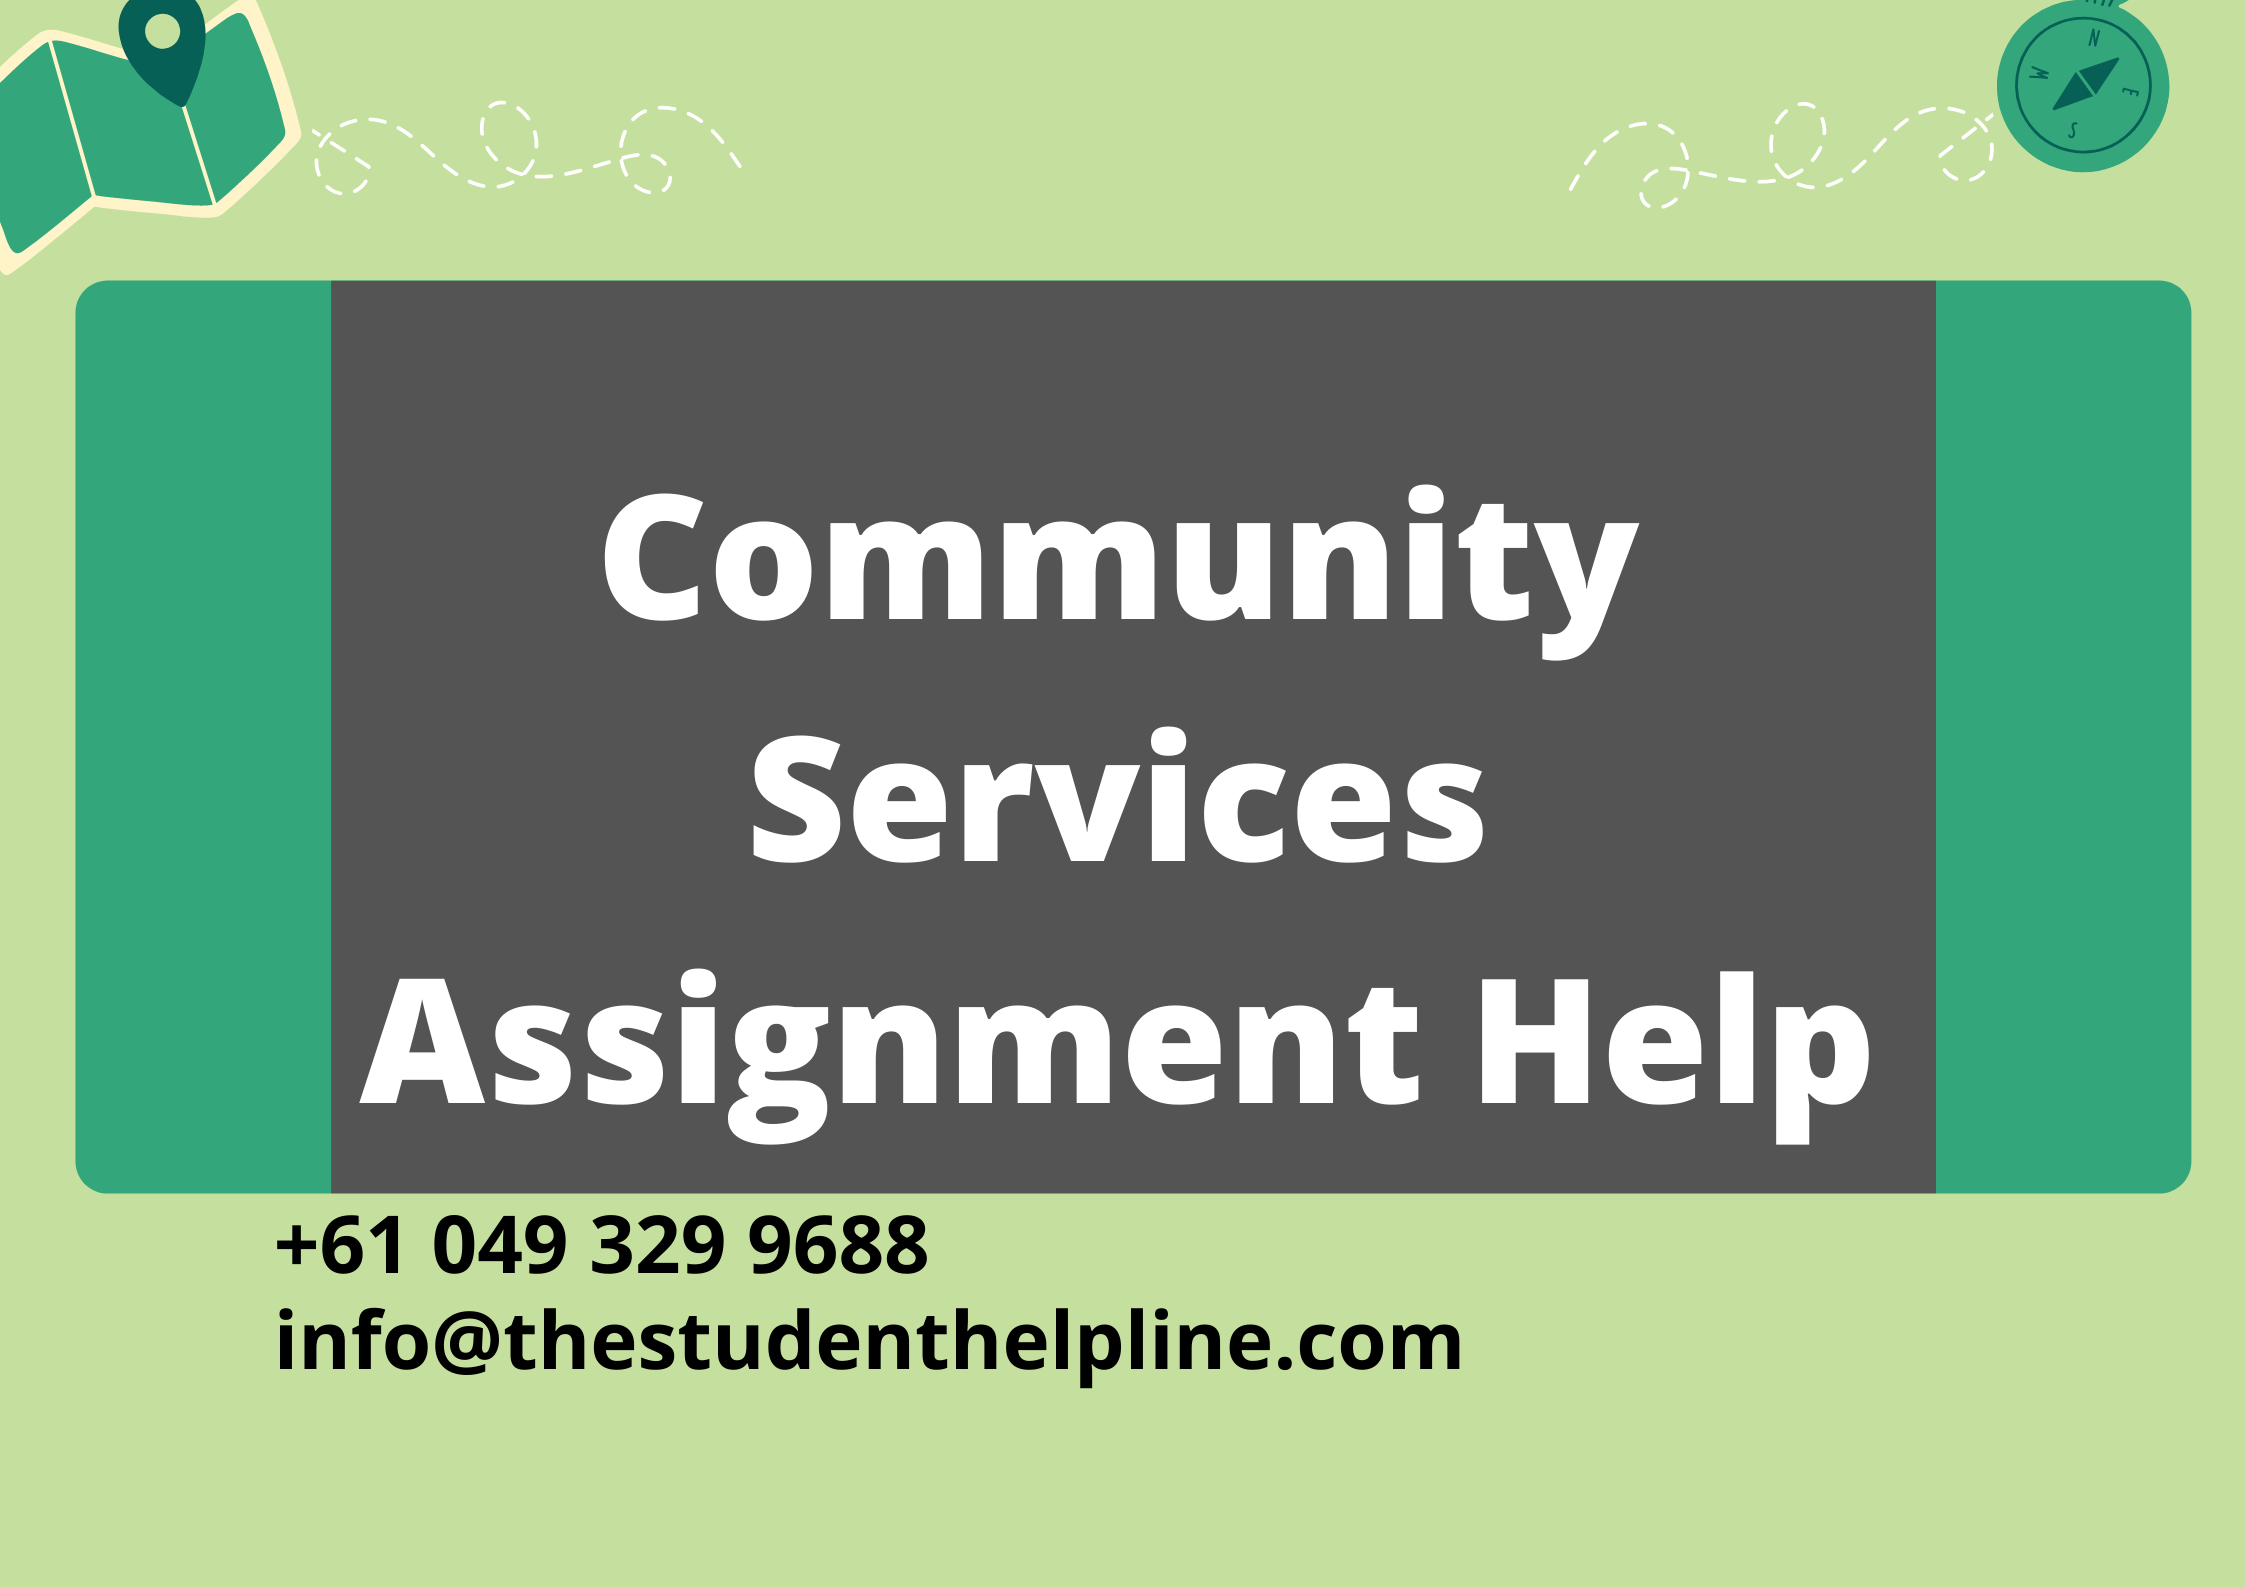 Get the Customized Solution for Community Services Assignment Help